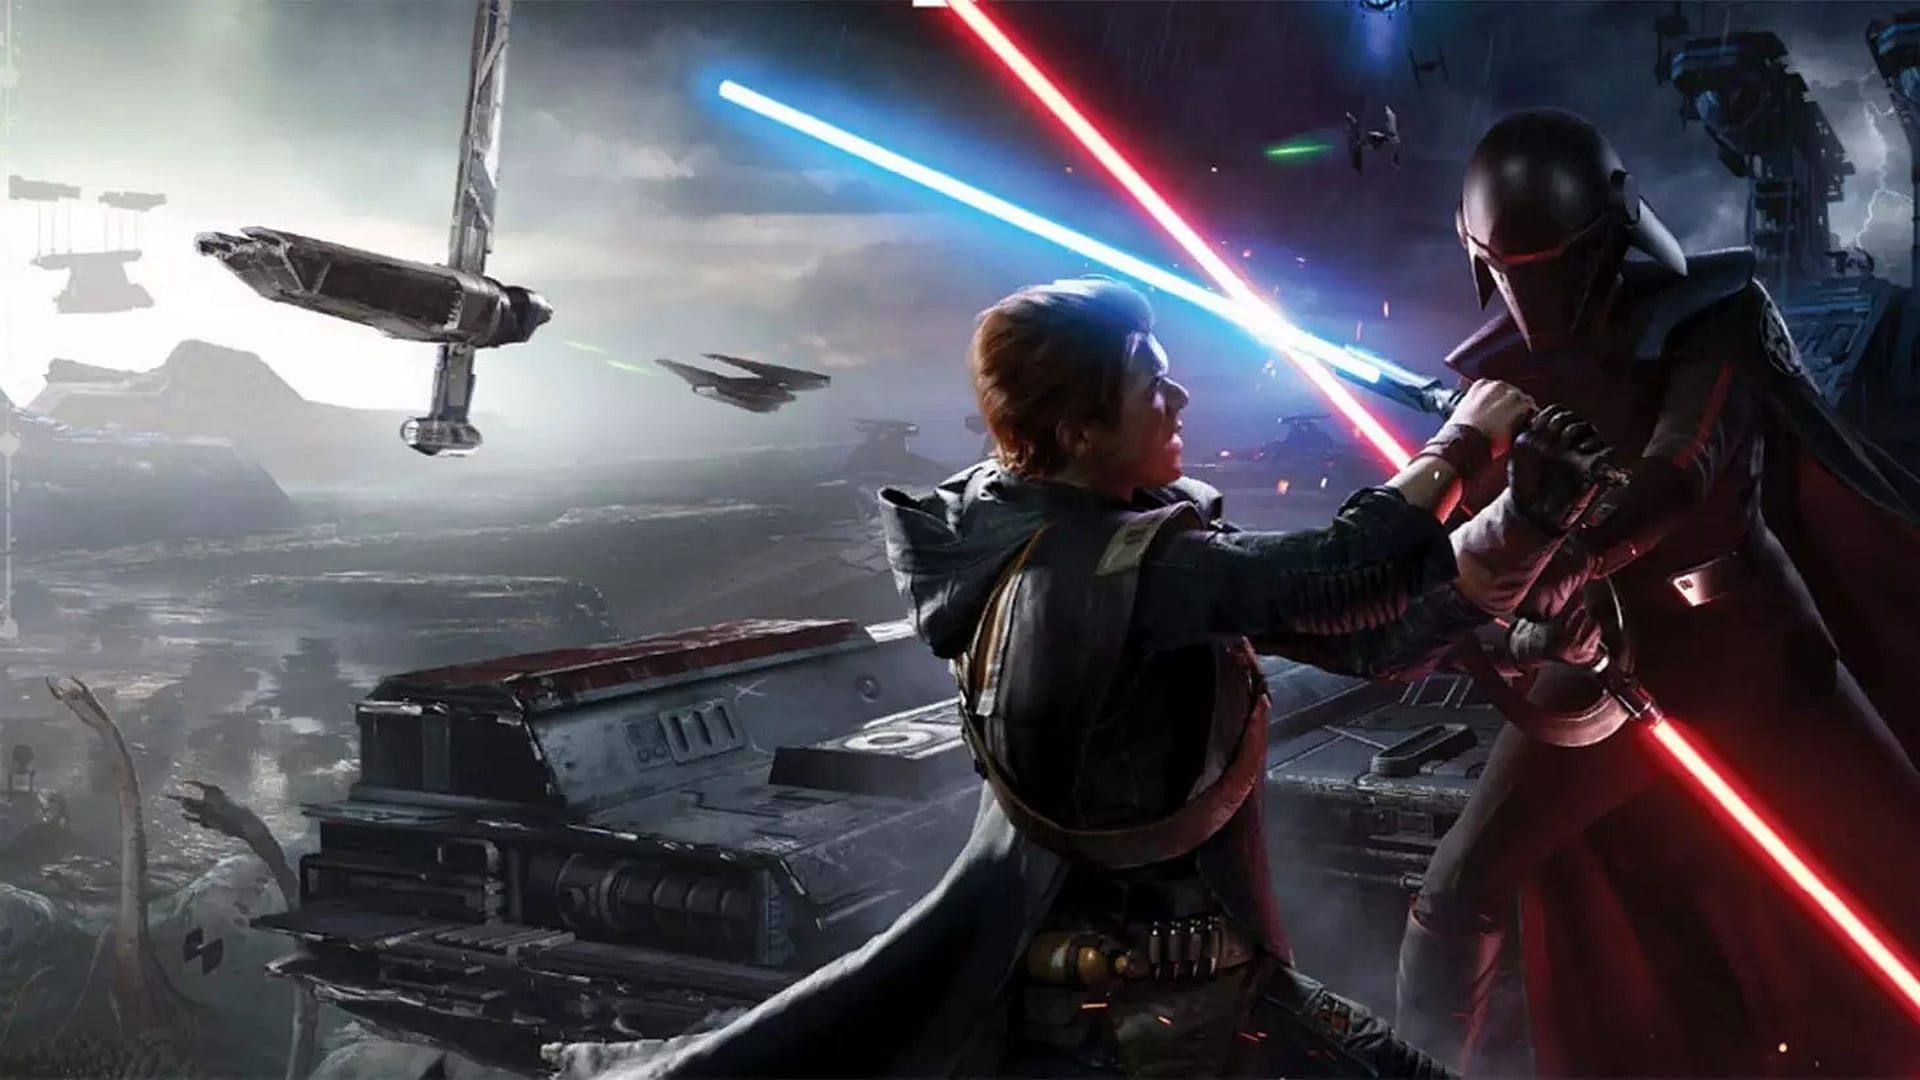 Star Wars Jedi: Fallen Order Is the Most Authentic Star Wars Game Ever